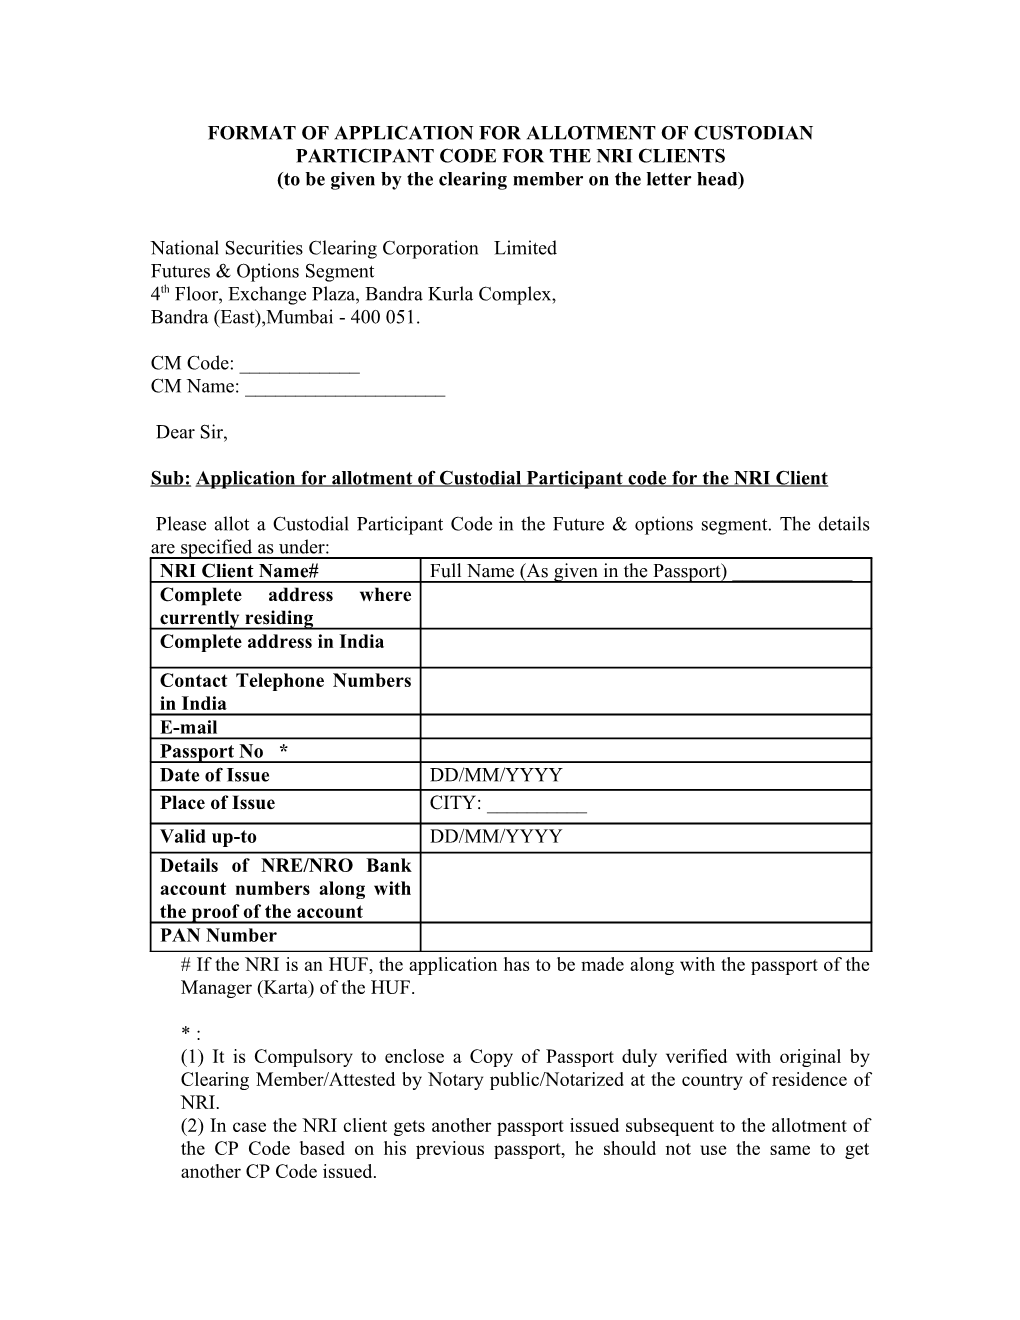 Format of Application for Allotment of Custodian Participant Code for the Nri Clients